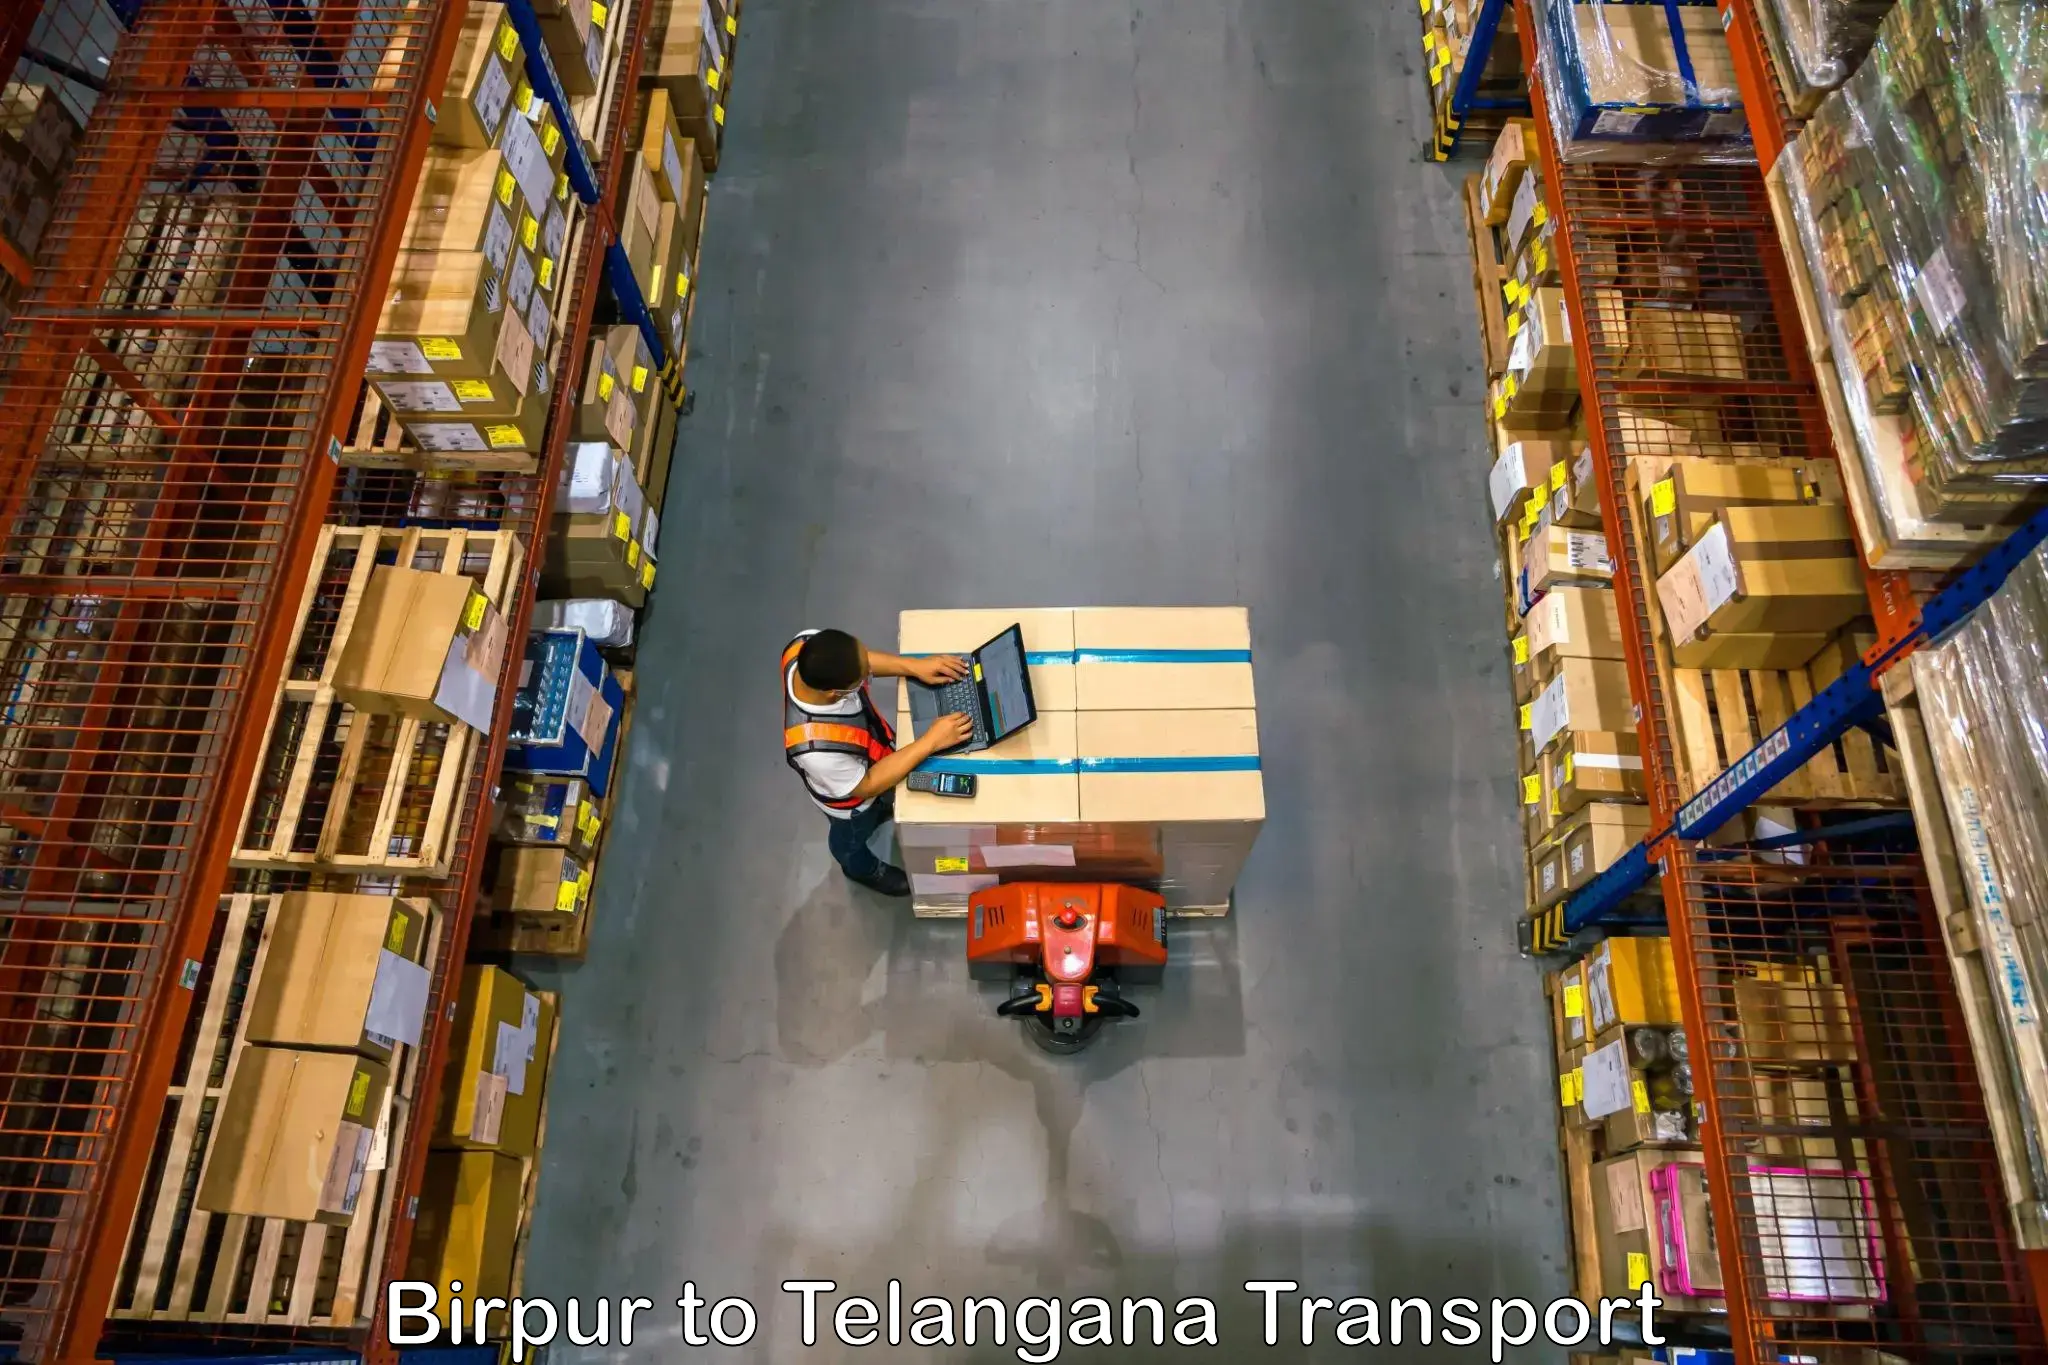 Goods delivery service Birpur to Kamalapur